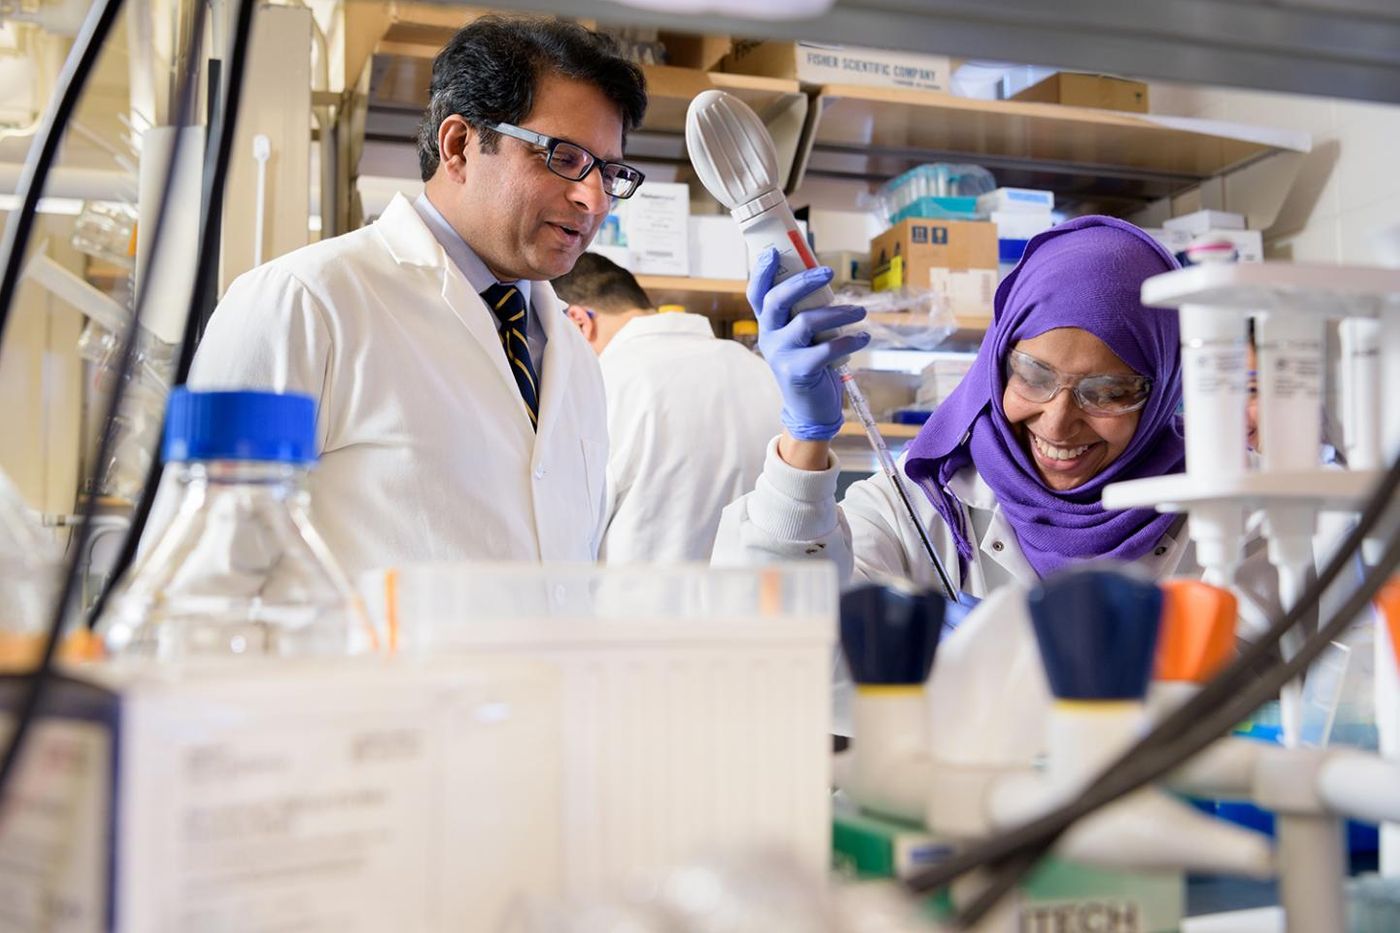 University of Delaware biologist Salil Lachke's research focuses on eye lens development. Here, he works in the lab with graduate student Salma Alsaai. / Credit: University of Delaware/ Evan Krape